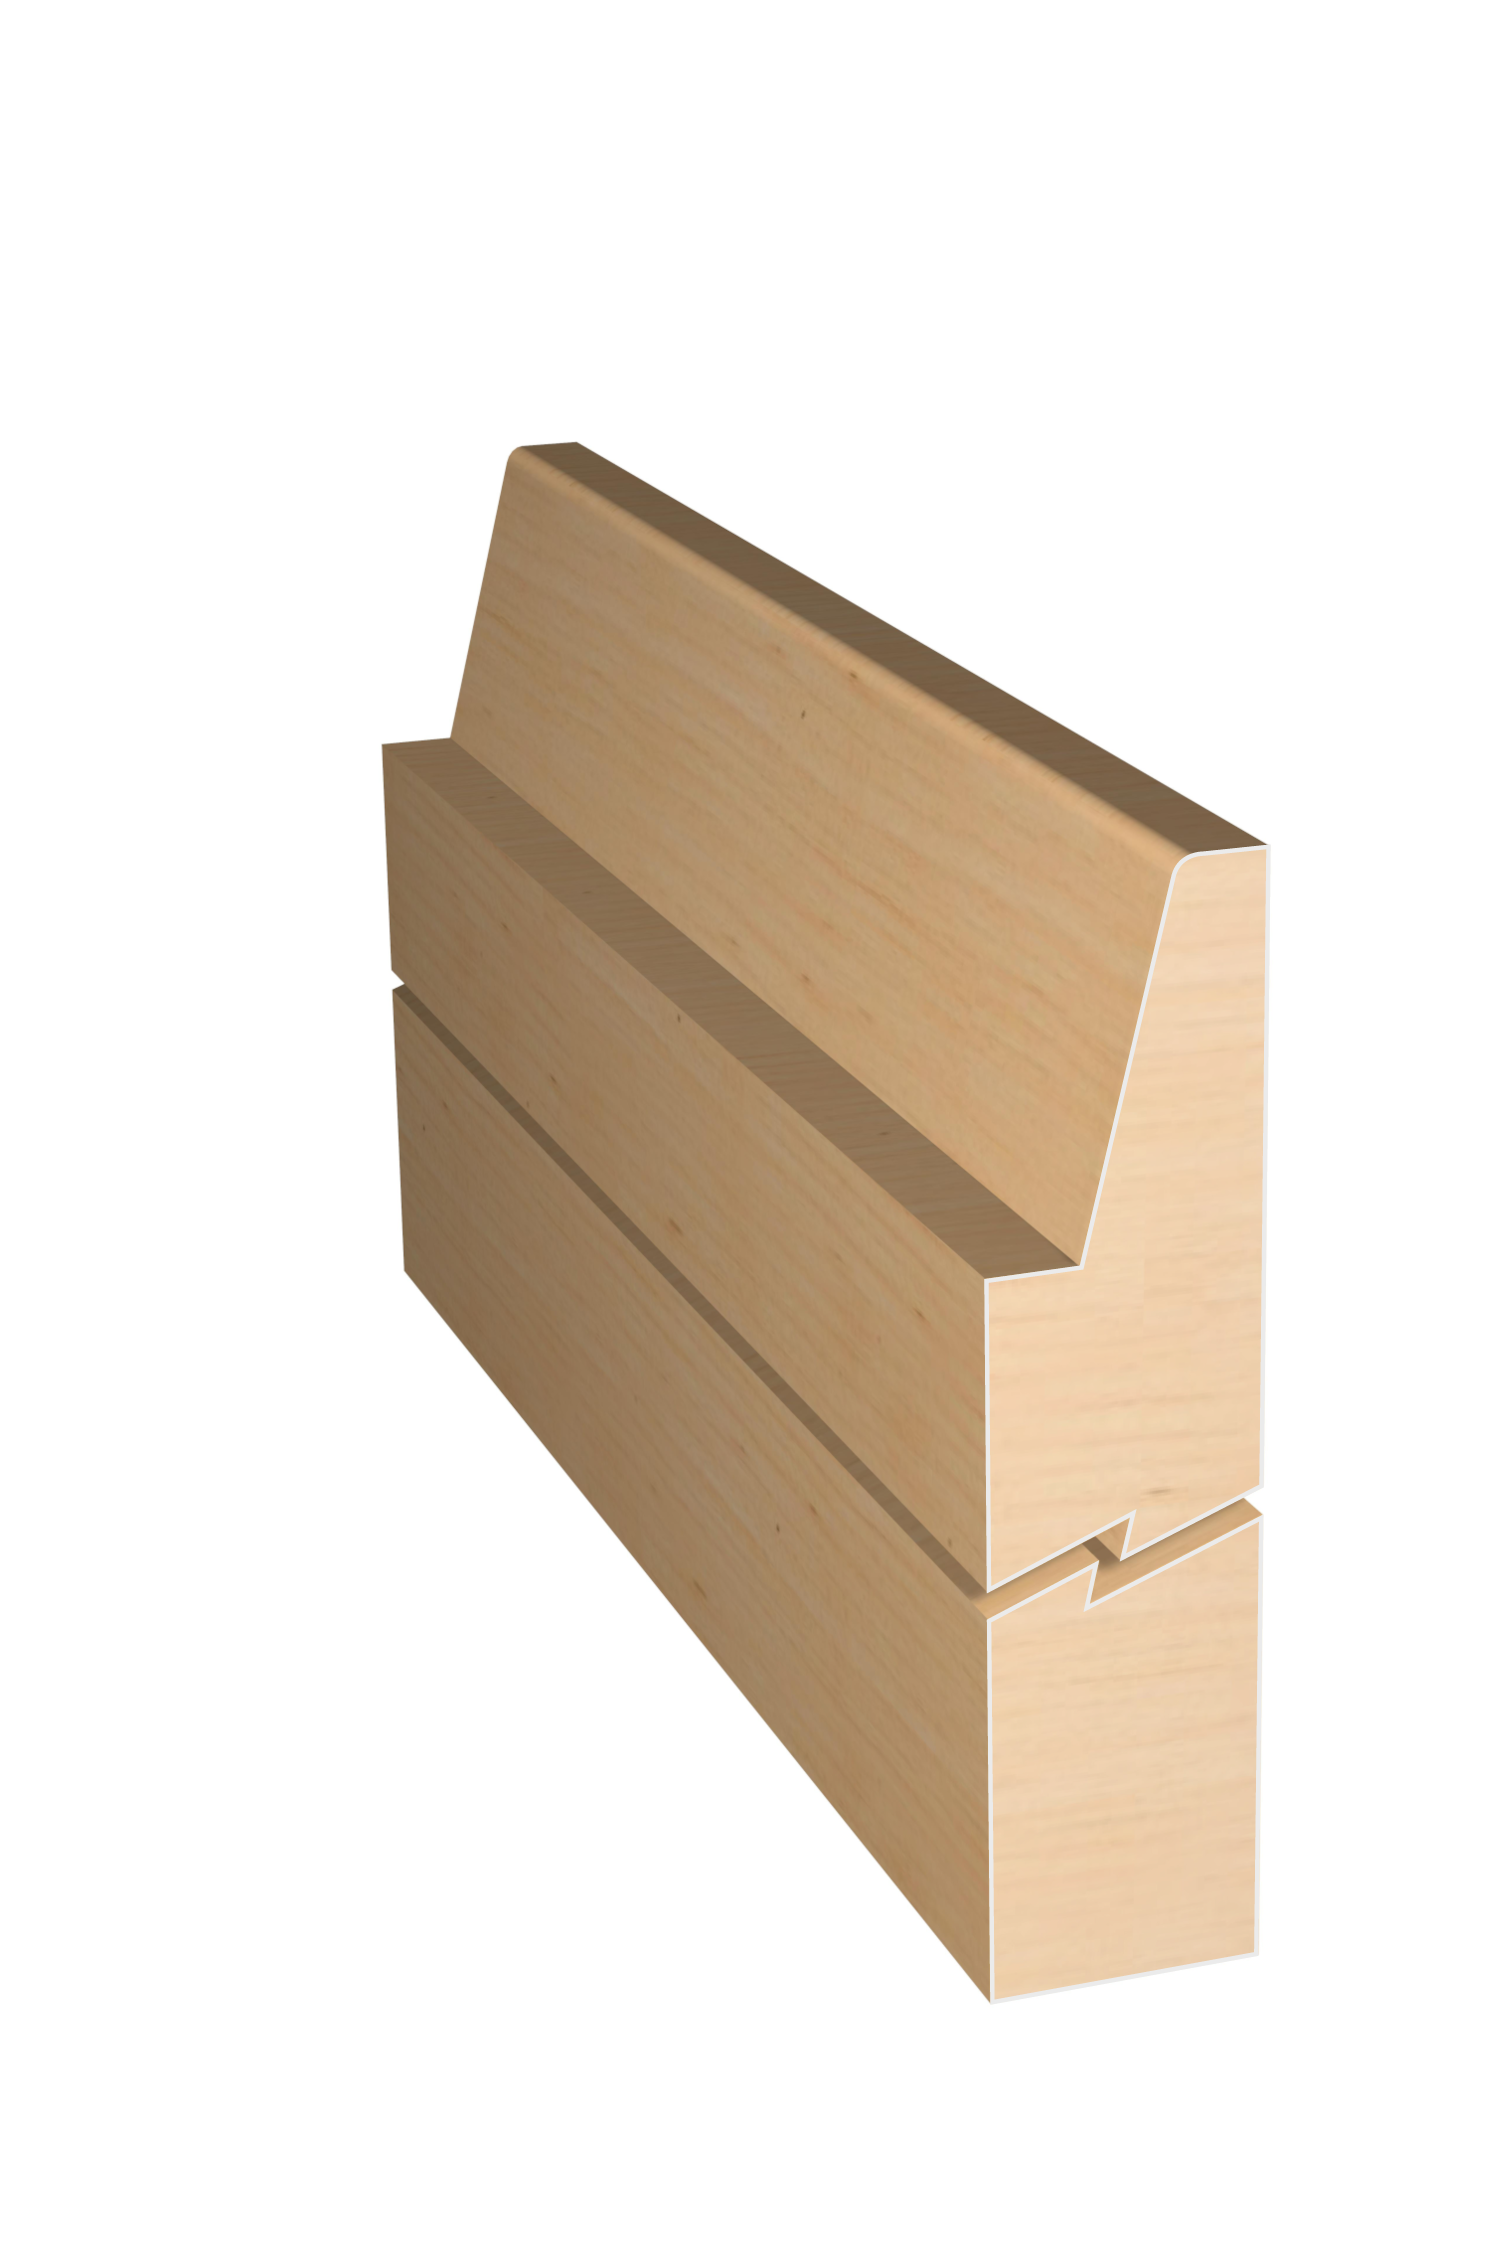 Three dimensional rendering of custom edge profile wood molding SKPL30 made by Public Lumber Company in Detroit.